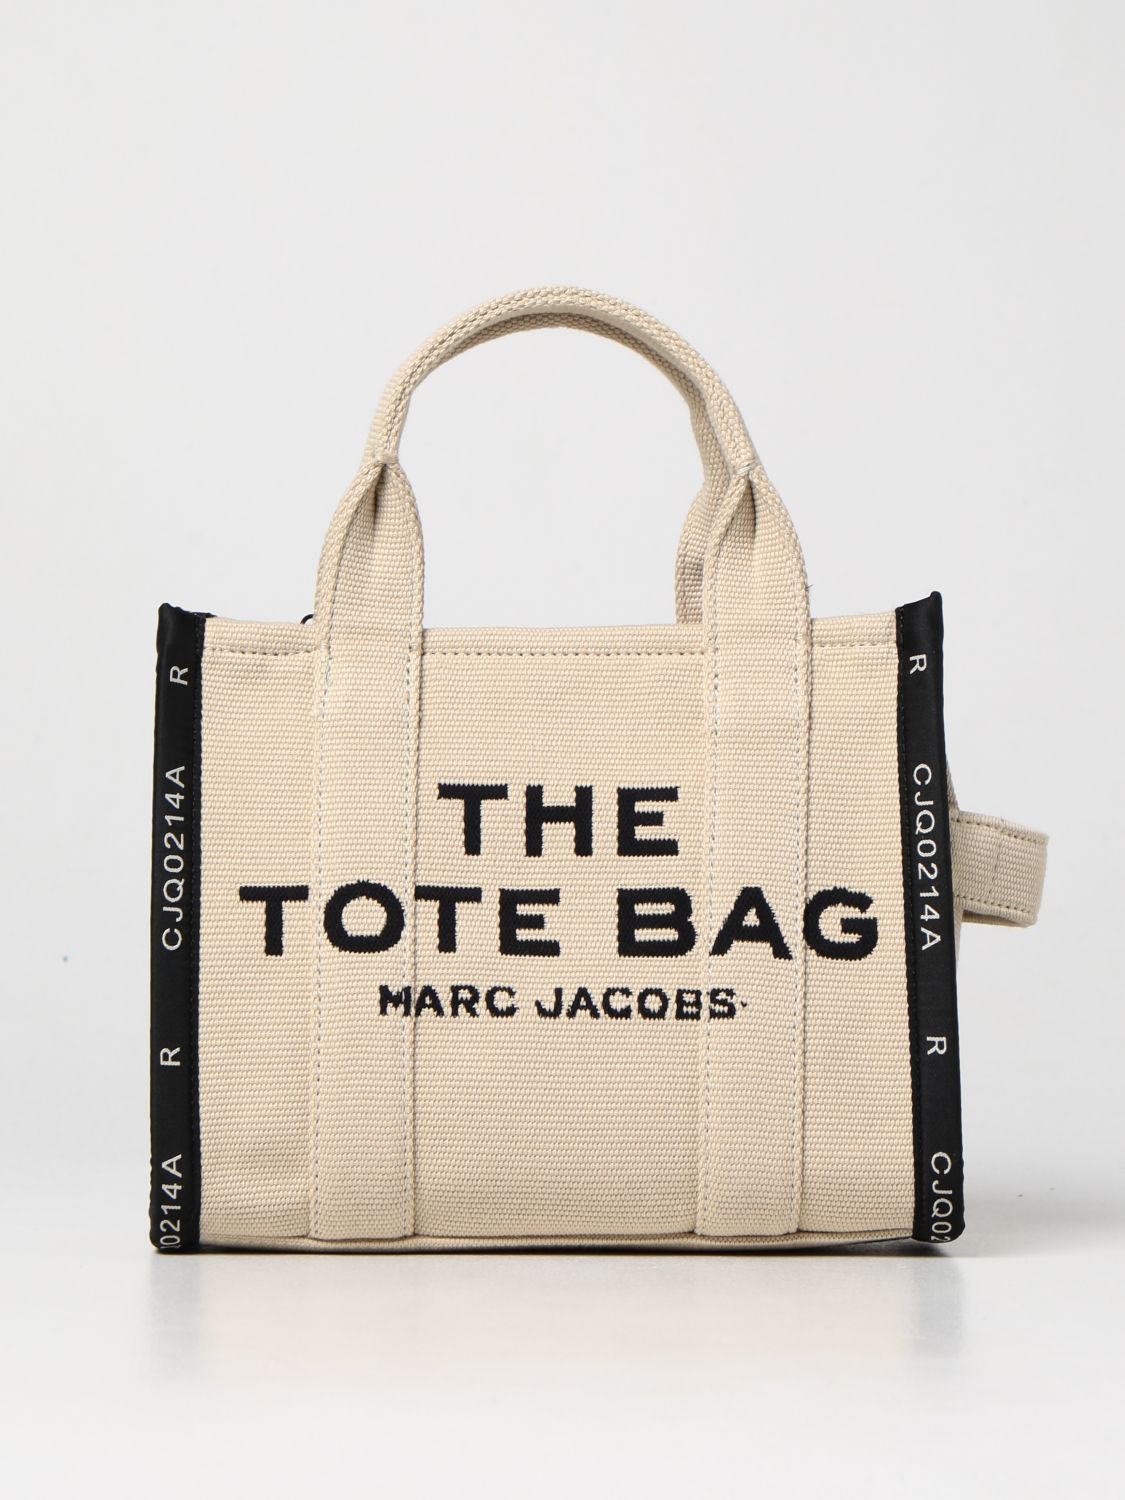 Marc Jacobs tote bags for Women